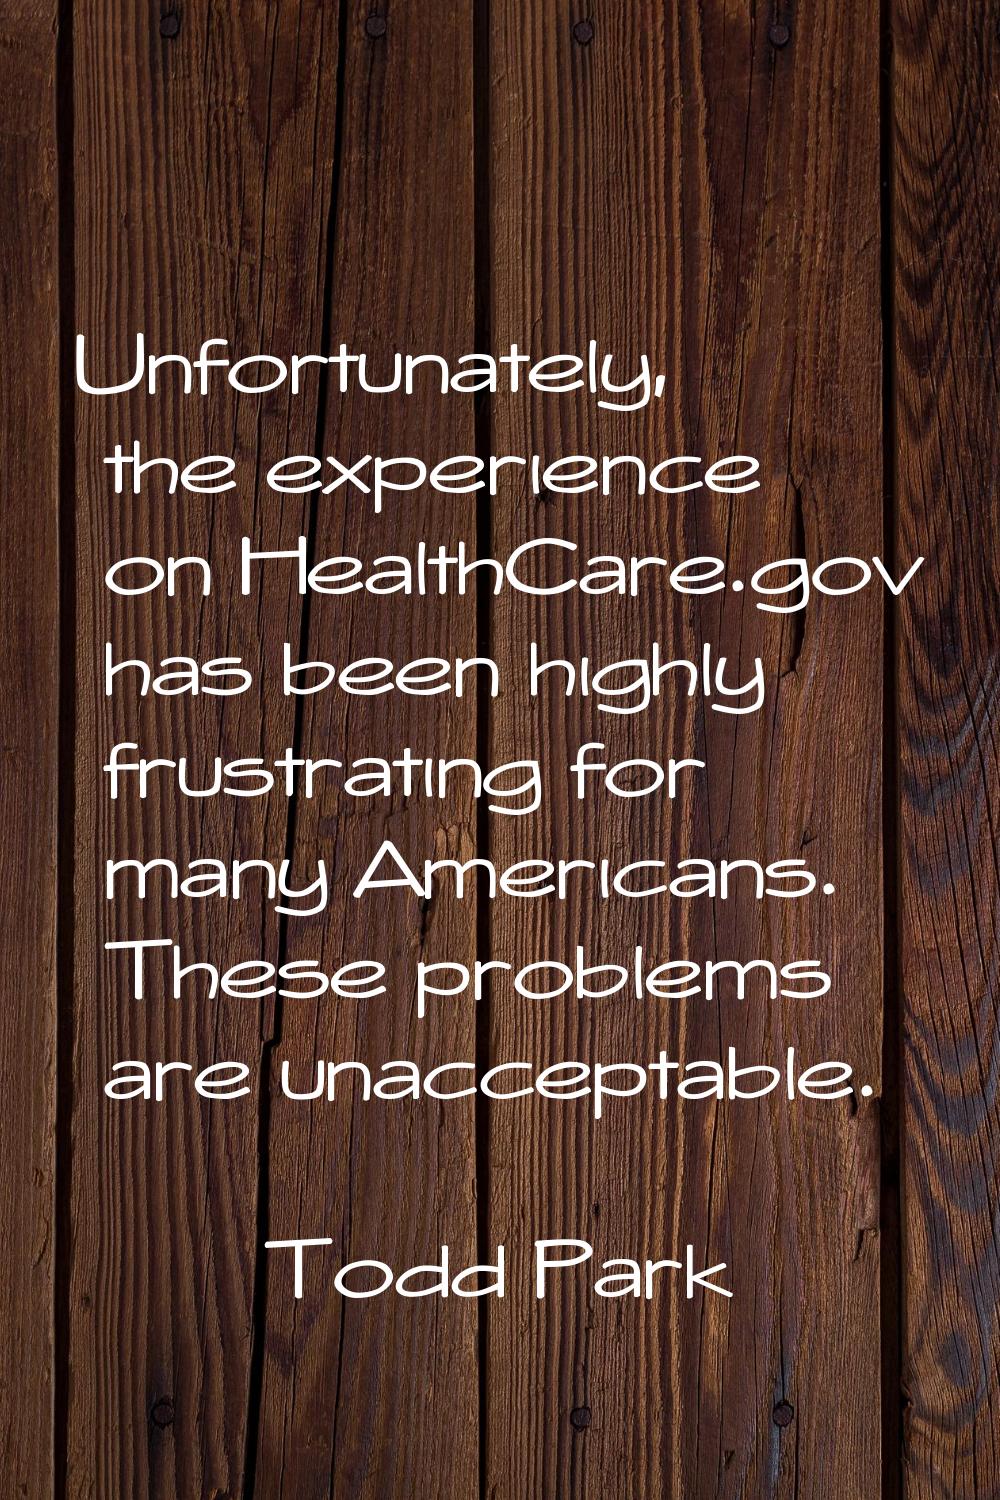 Unfortunately, the experience on HealthCare.gov has been highly frustrating for many Americans. The